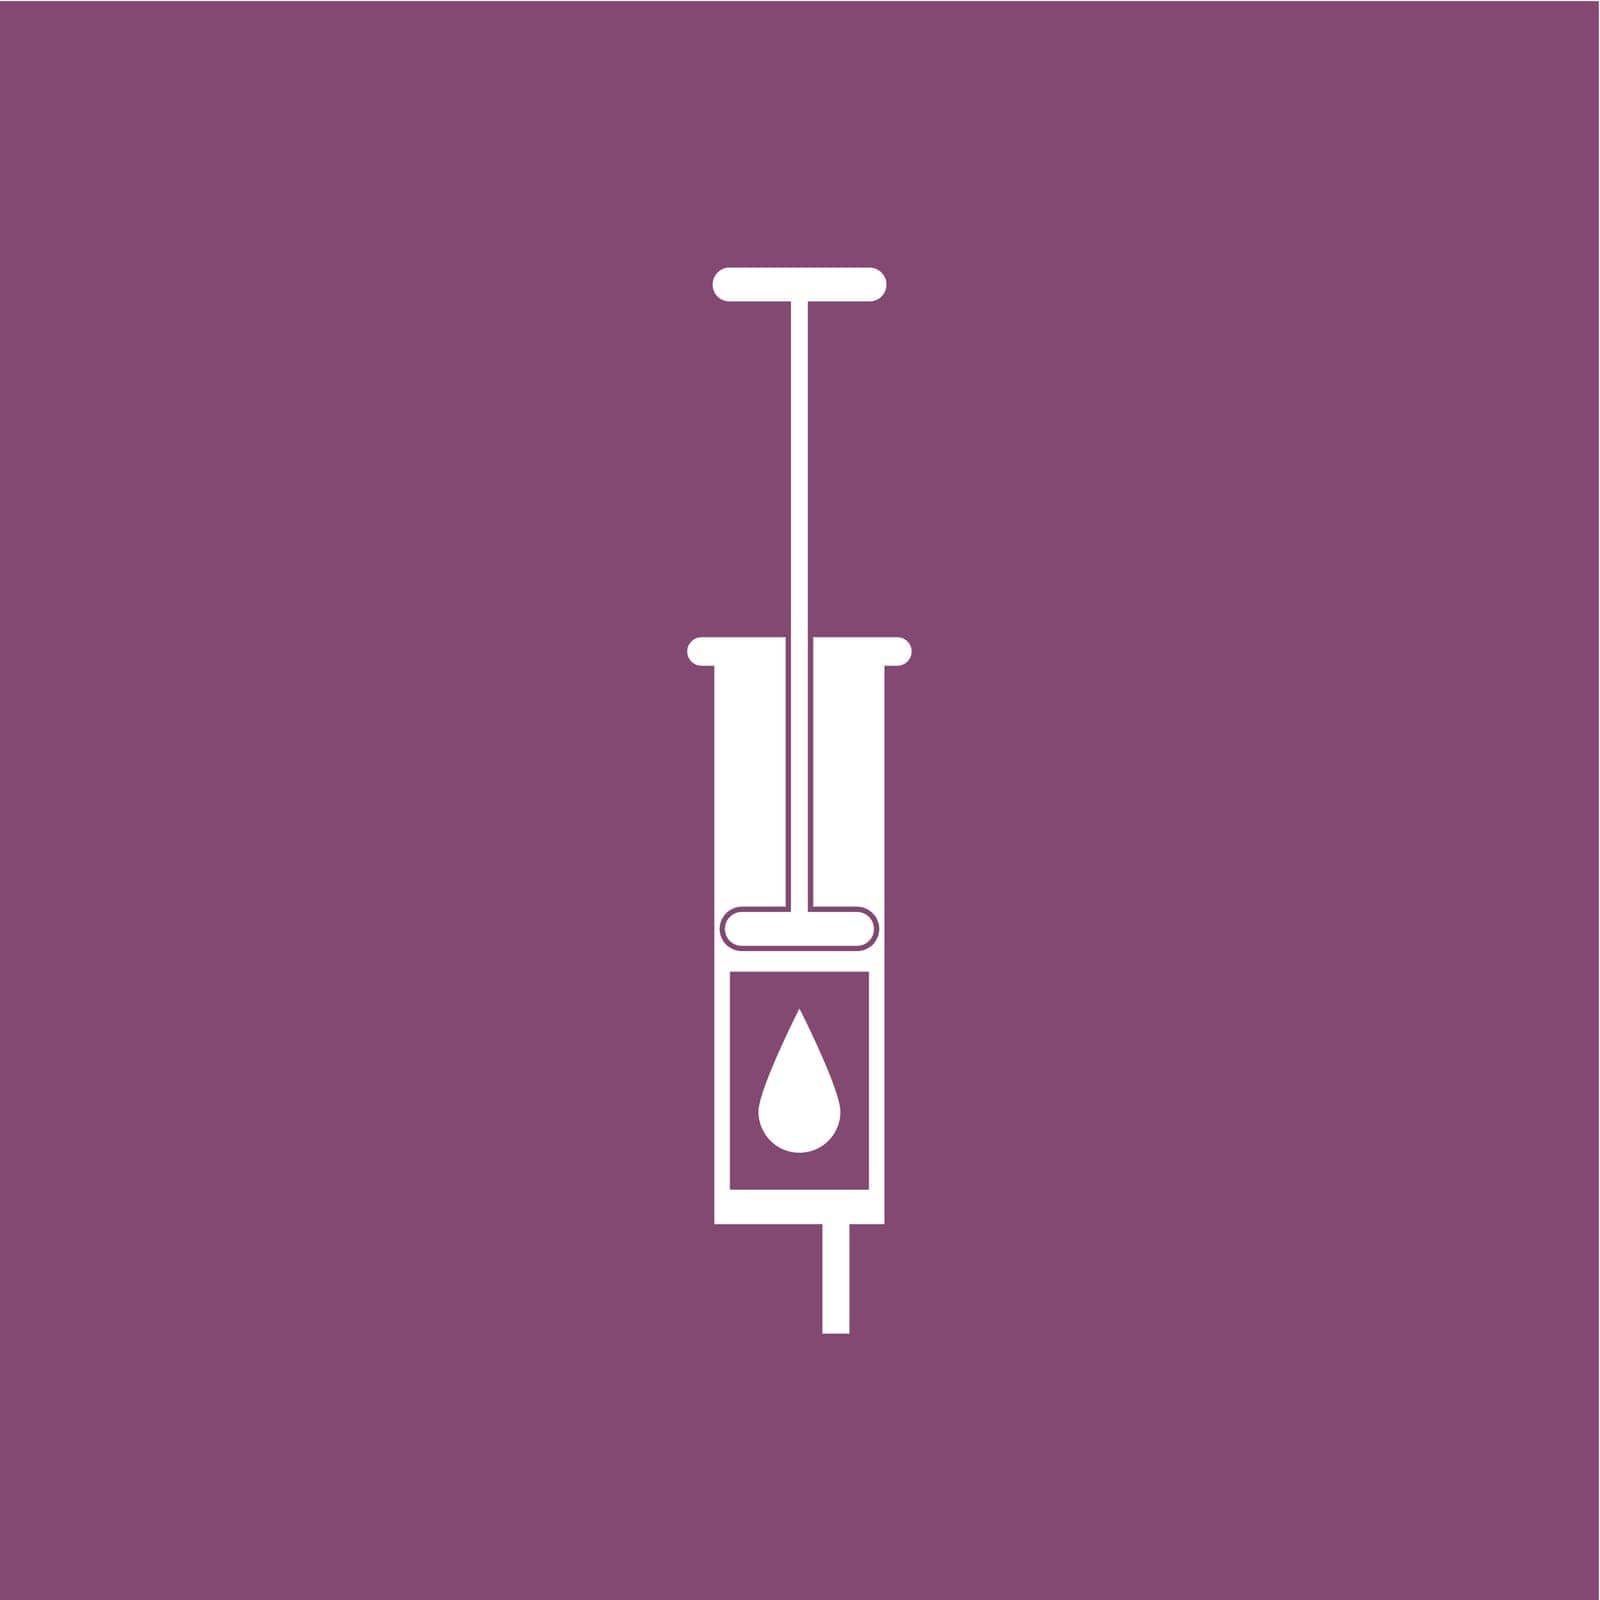 symbol,treatment,medical,mobility,icon,sign,instrument,narcotic,drug,syringe,usability,flat,nurse,hospital,illness,innovation,therapy,health,equipment,medicine,single,badge,clinical,liquid,application,clinic,needle,injection,diabetes,vaccination by ogqcorp